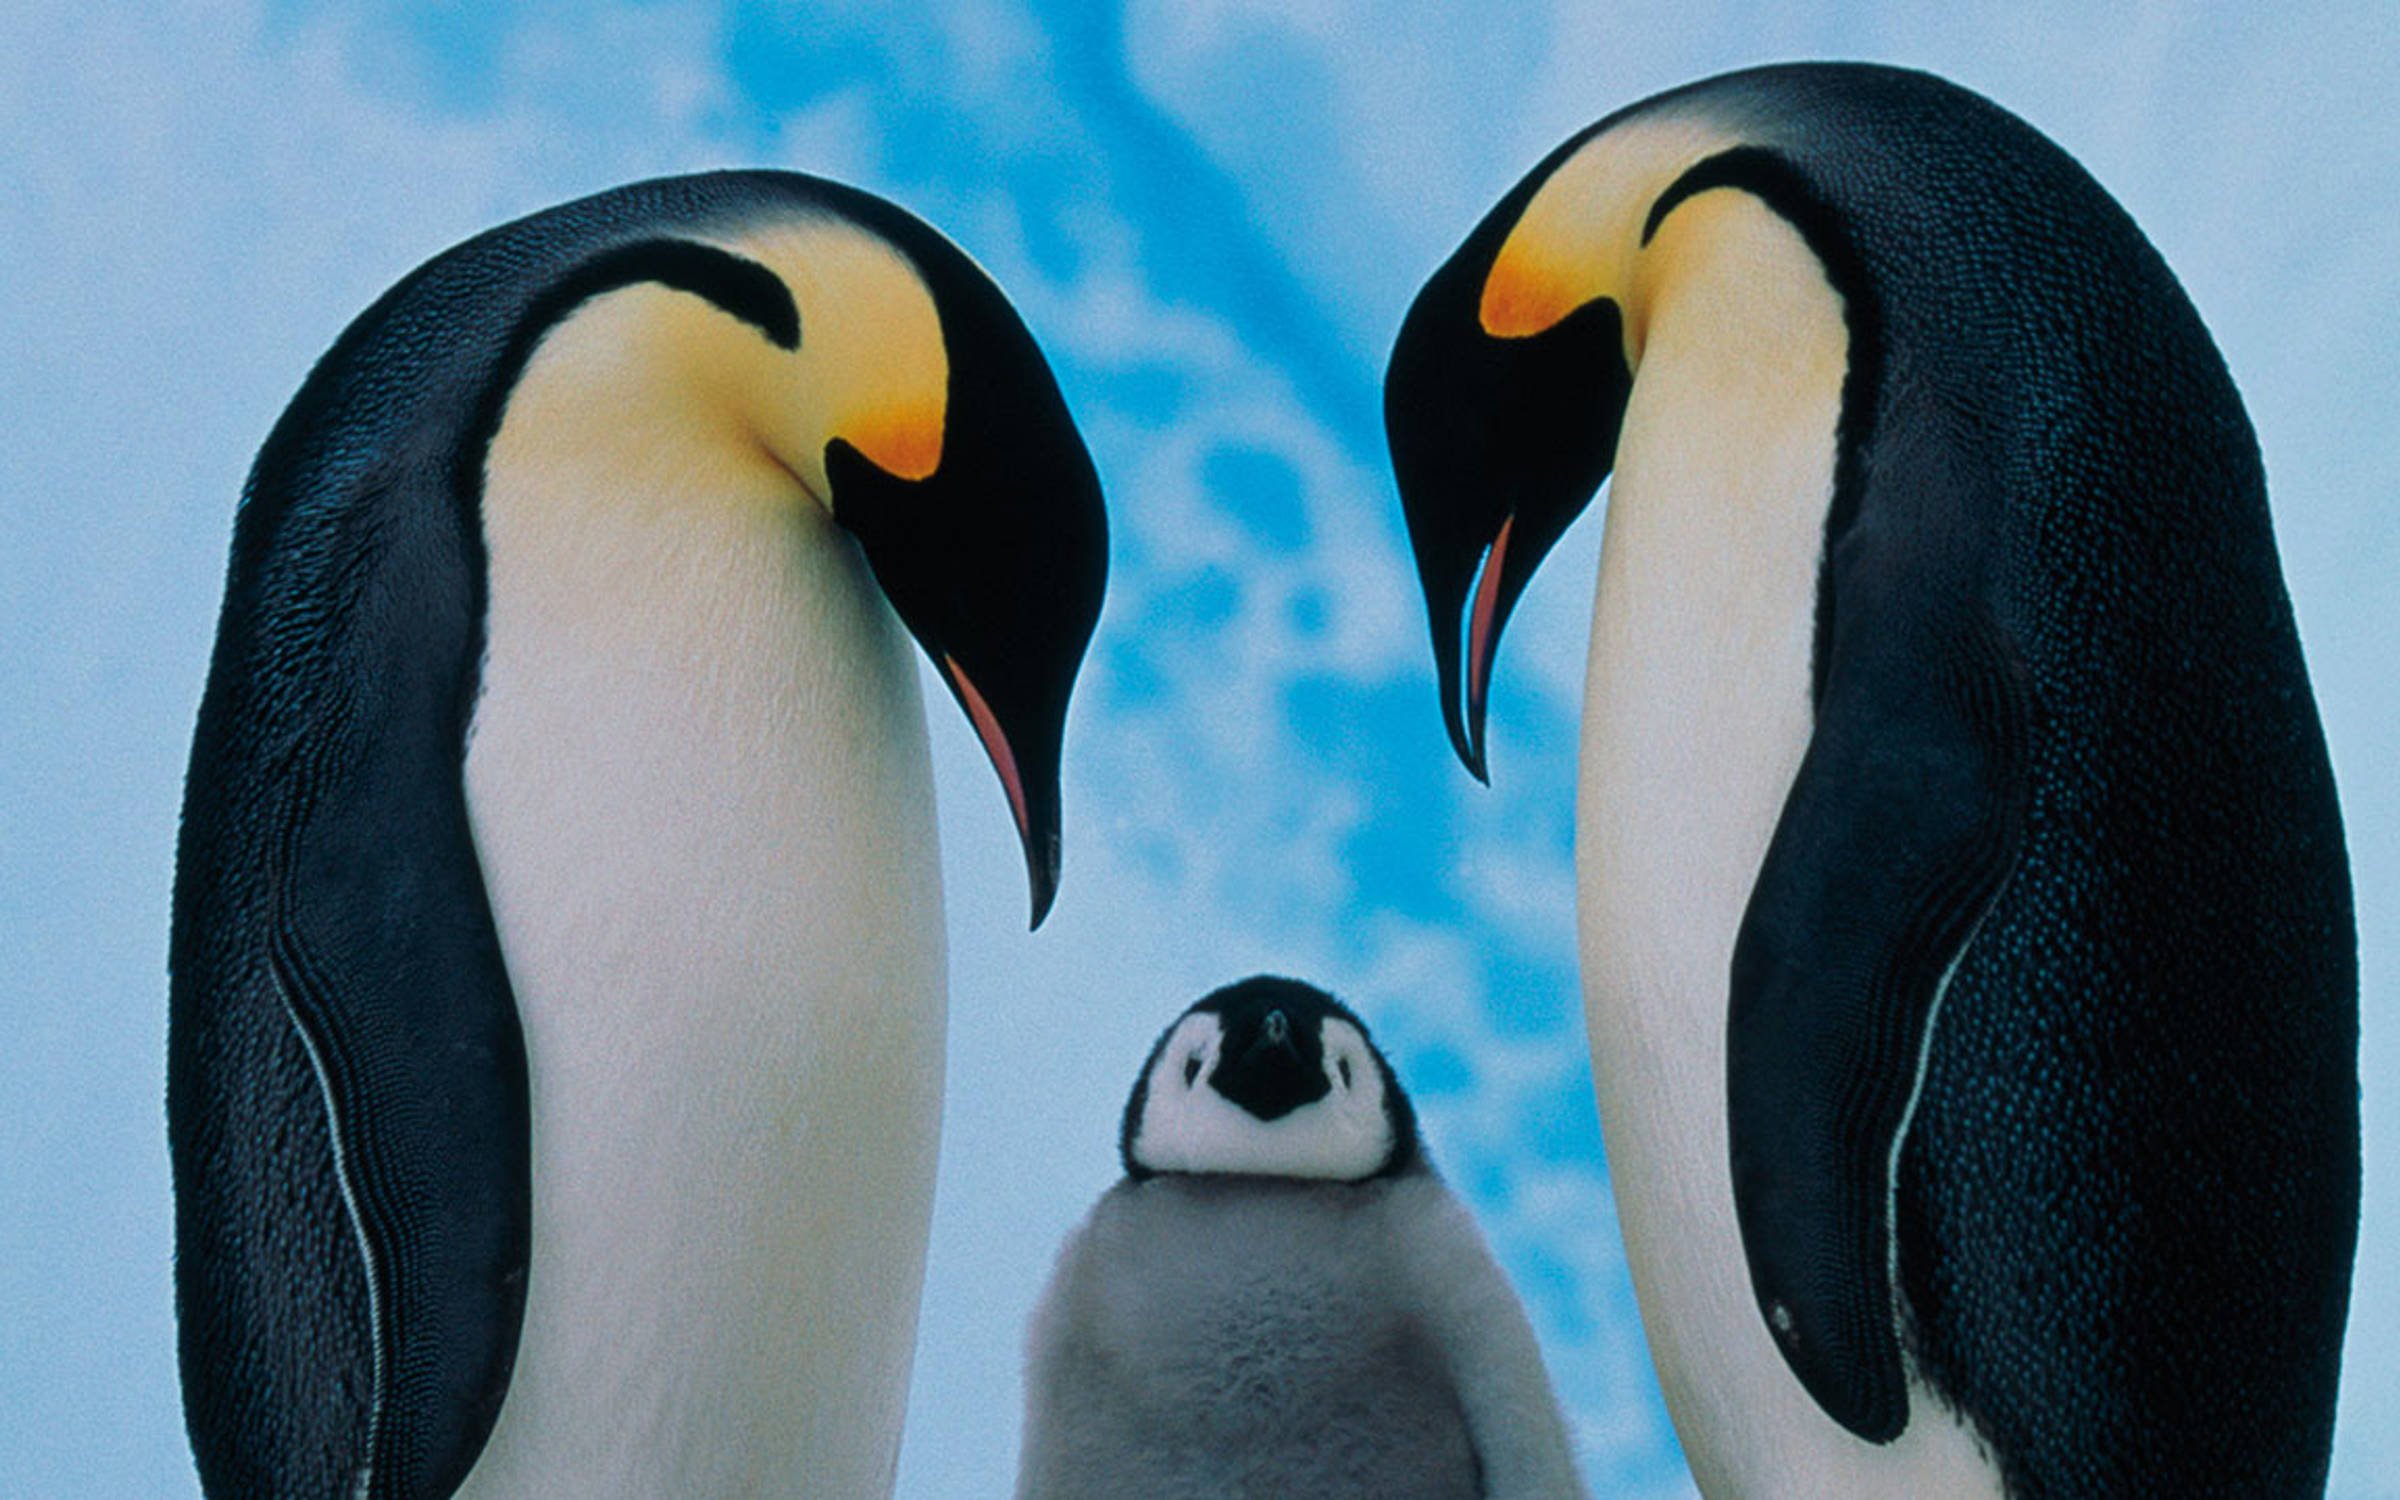 Care - Penguin parents looking over their child.